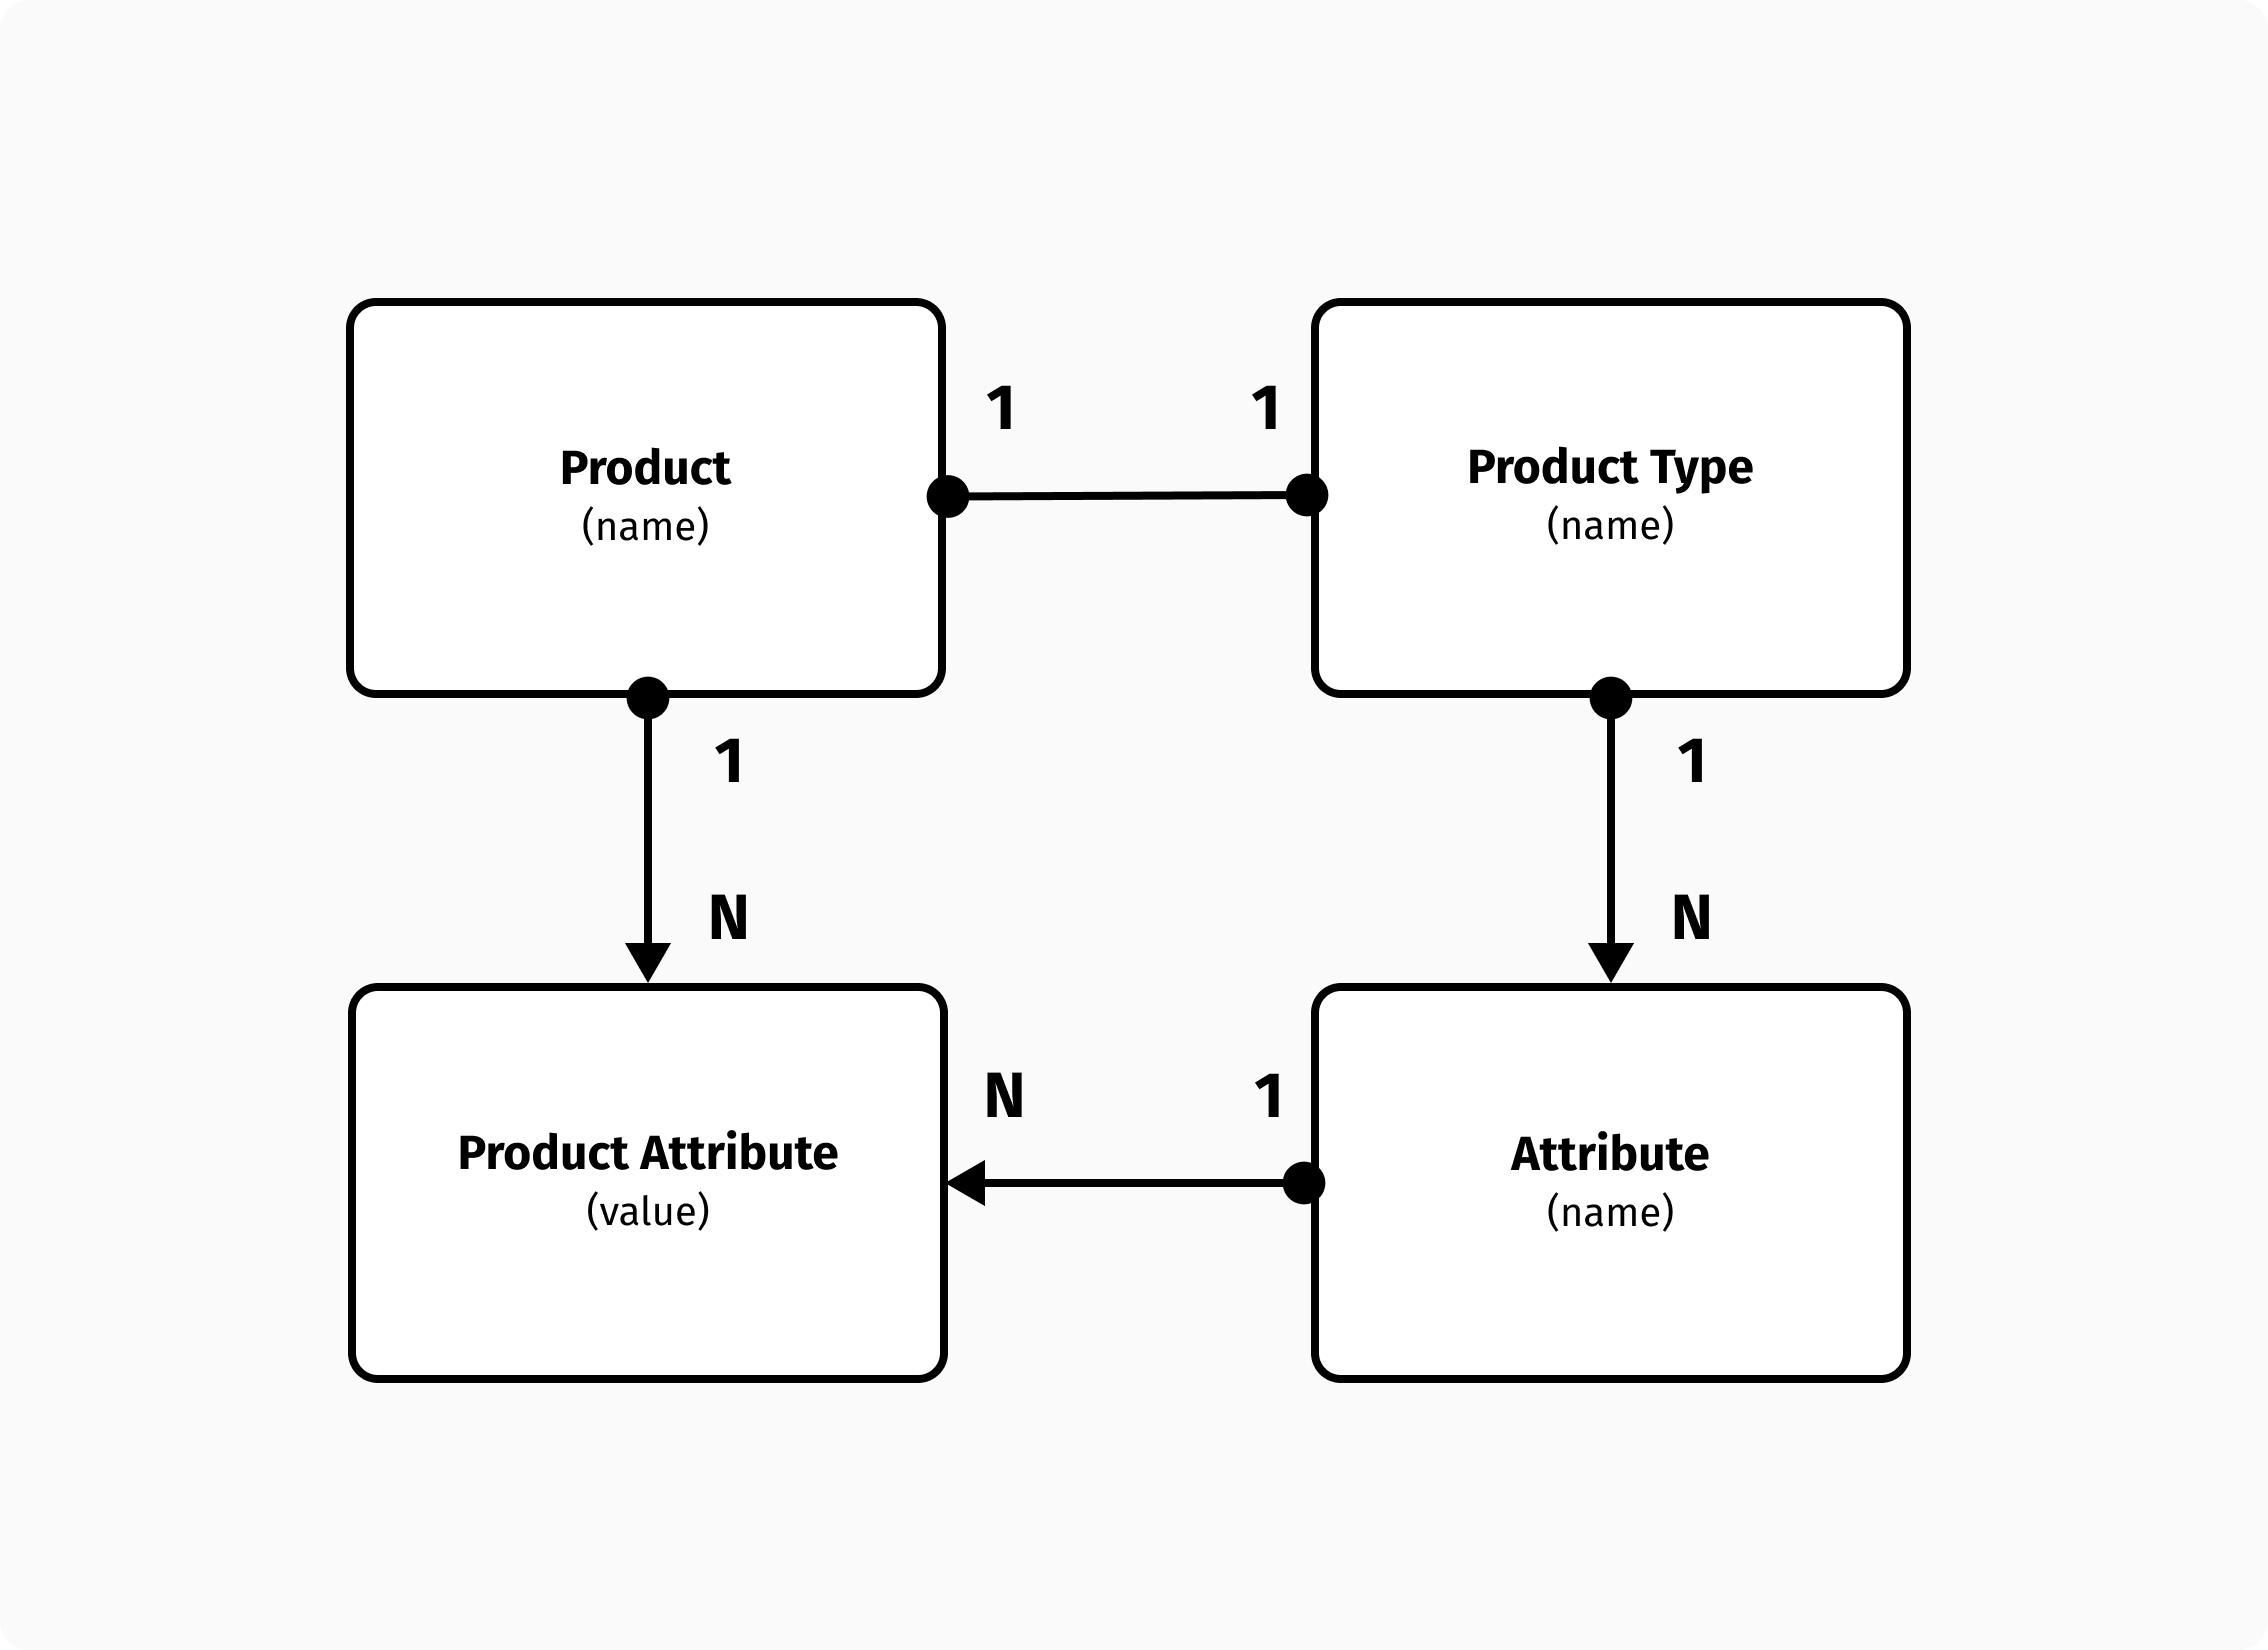 Each product belongs to a product type, which determines its attributes.